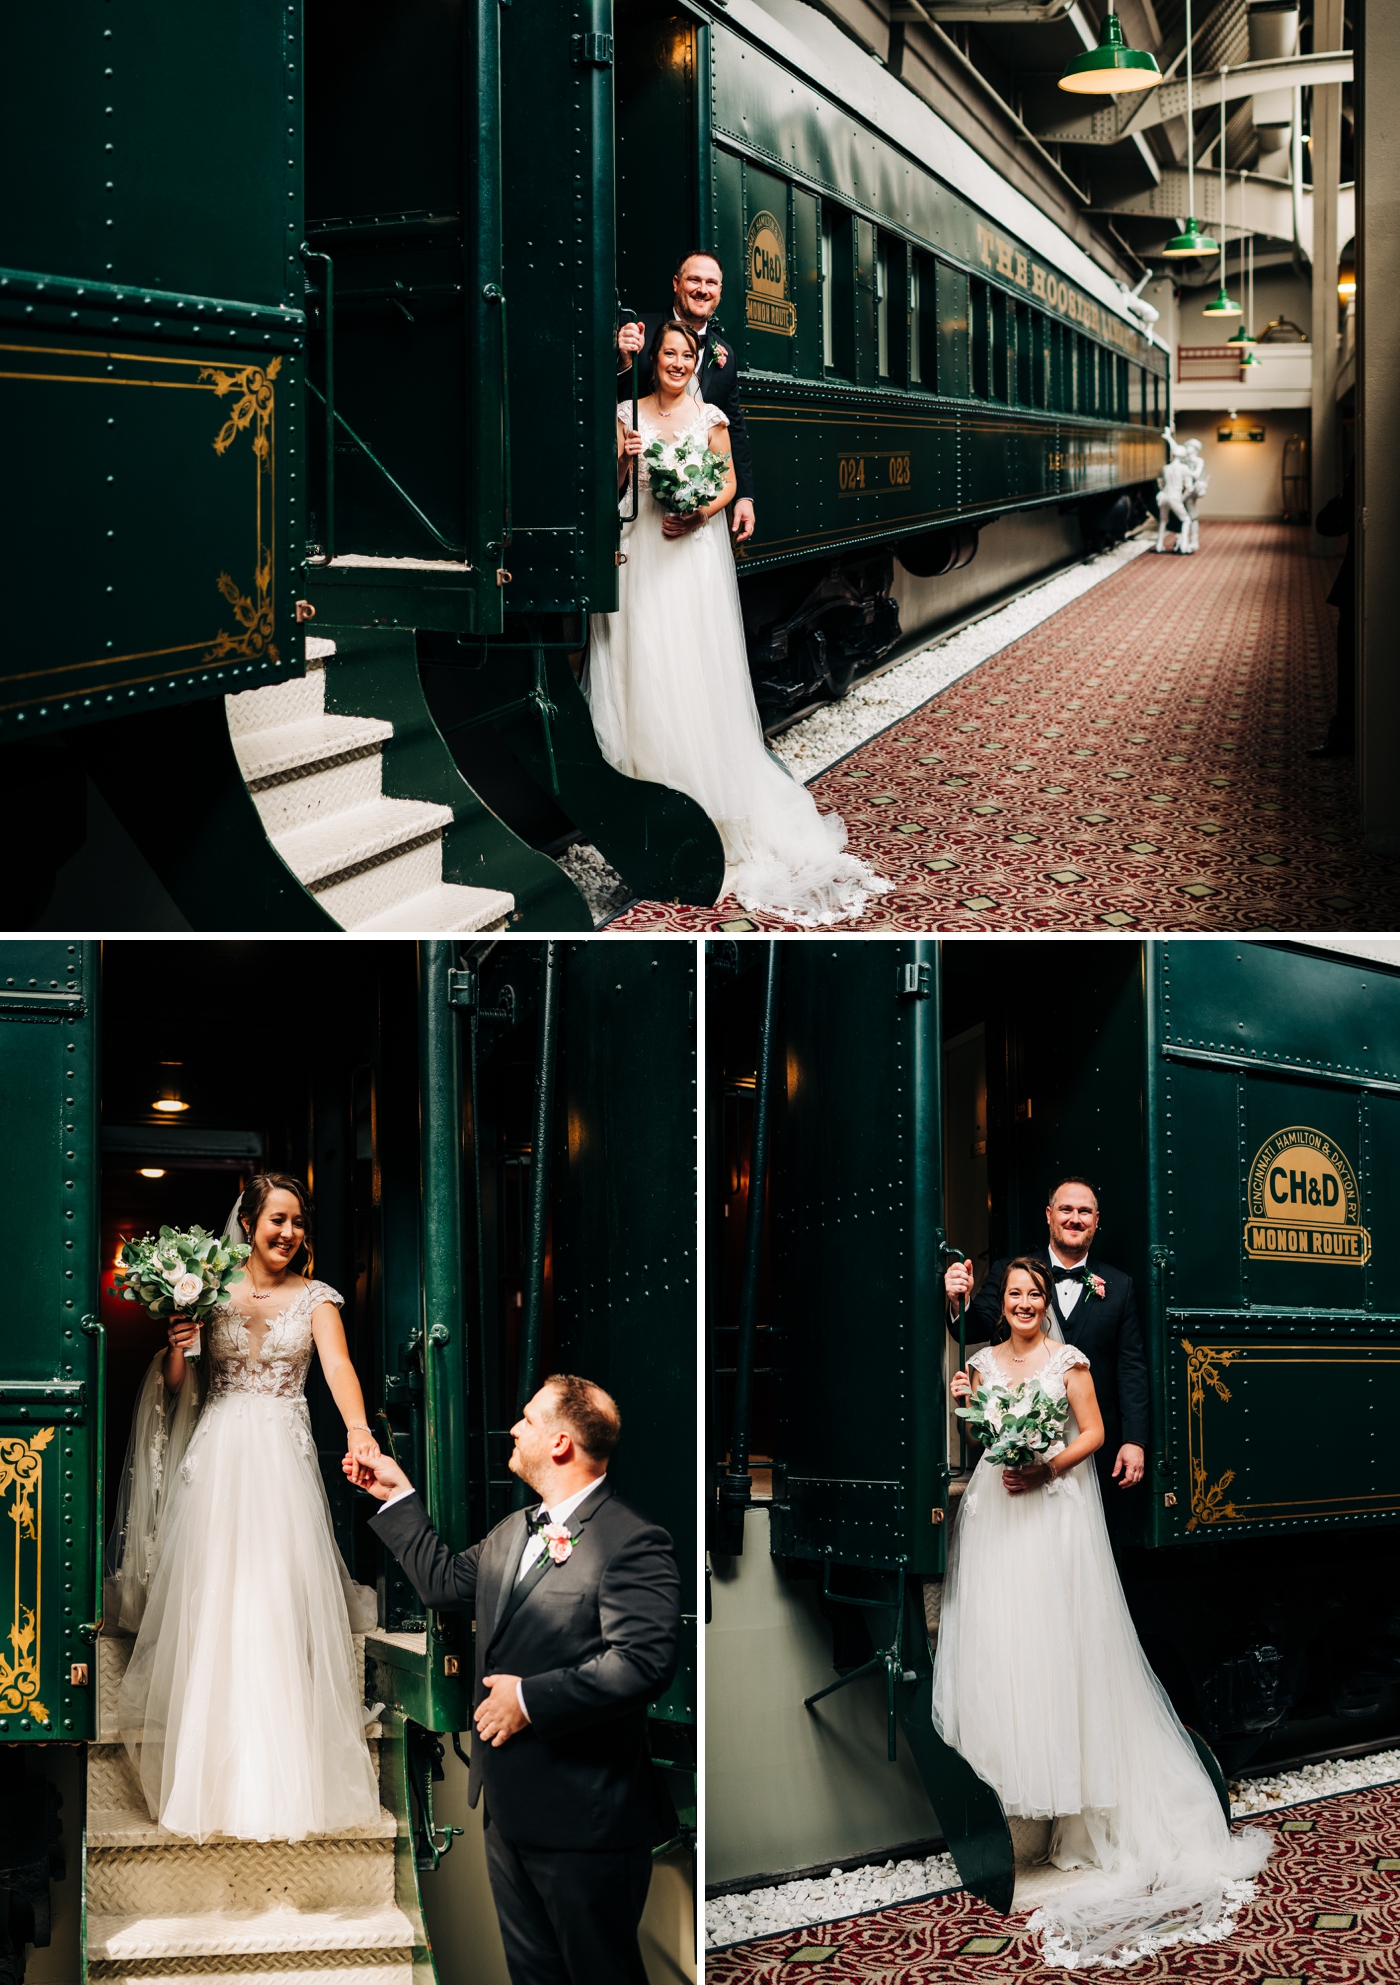 Vintage train photos with bride and groom at Union Station